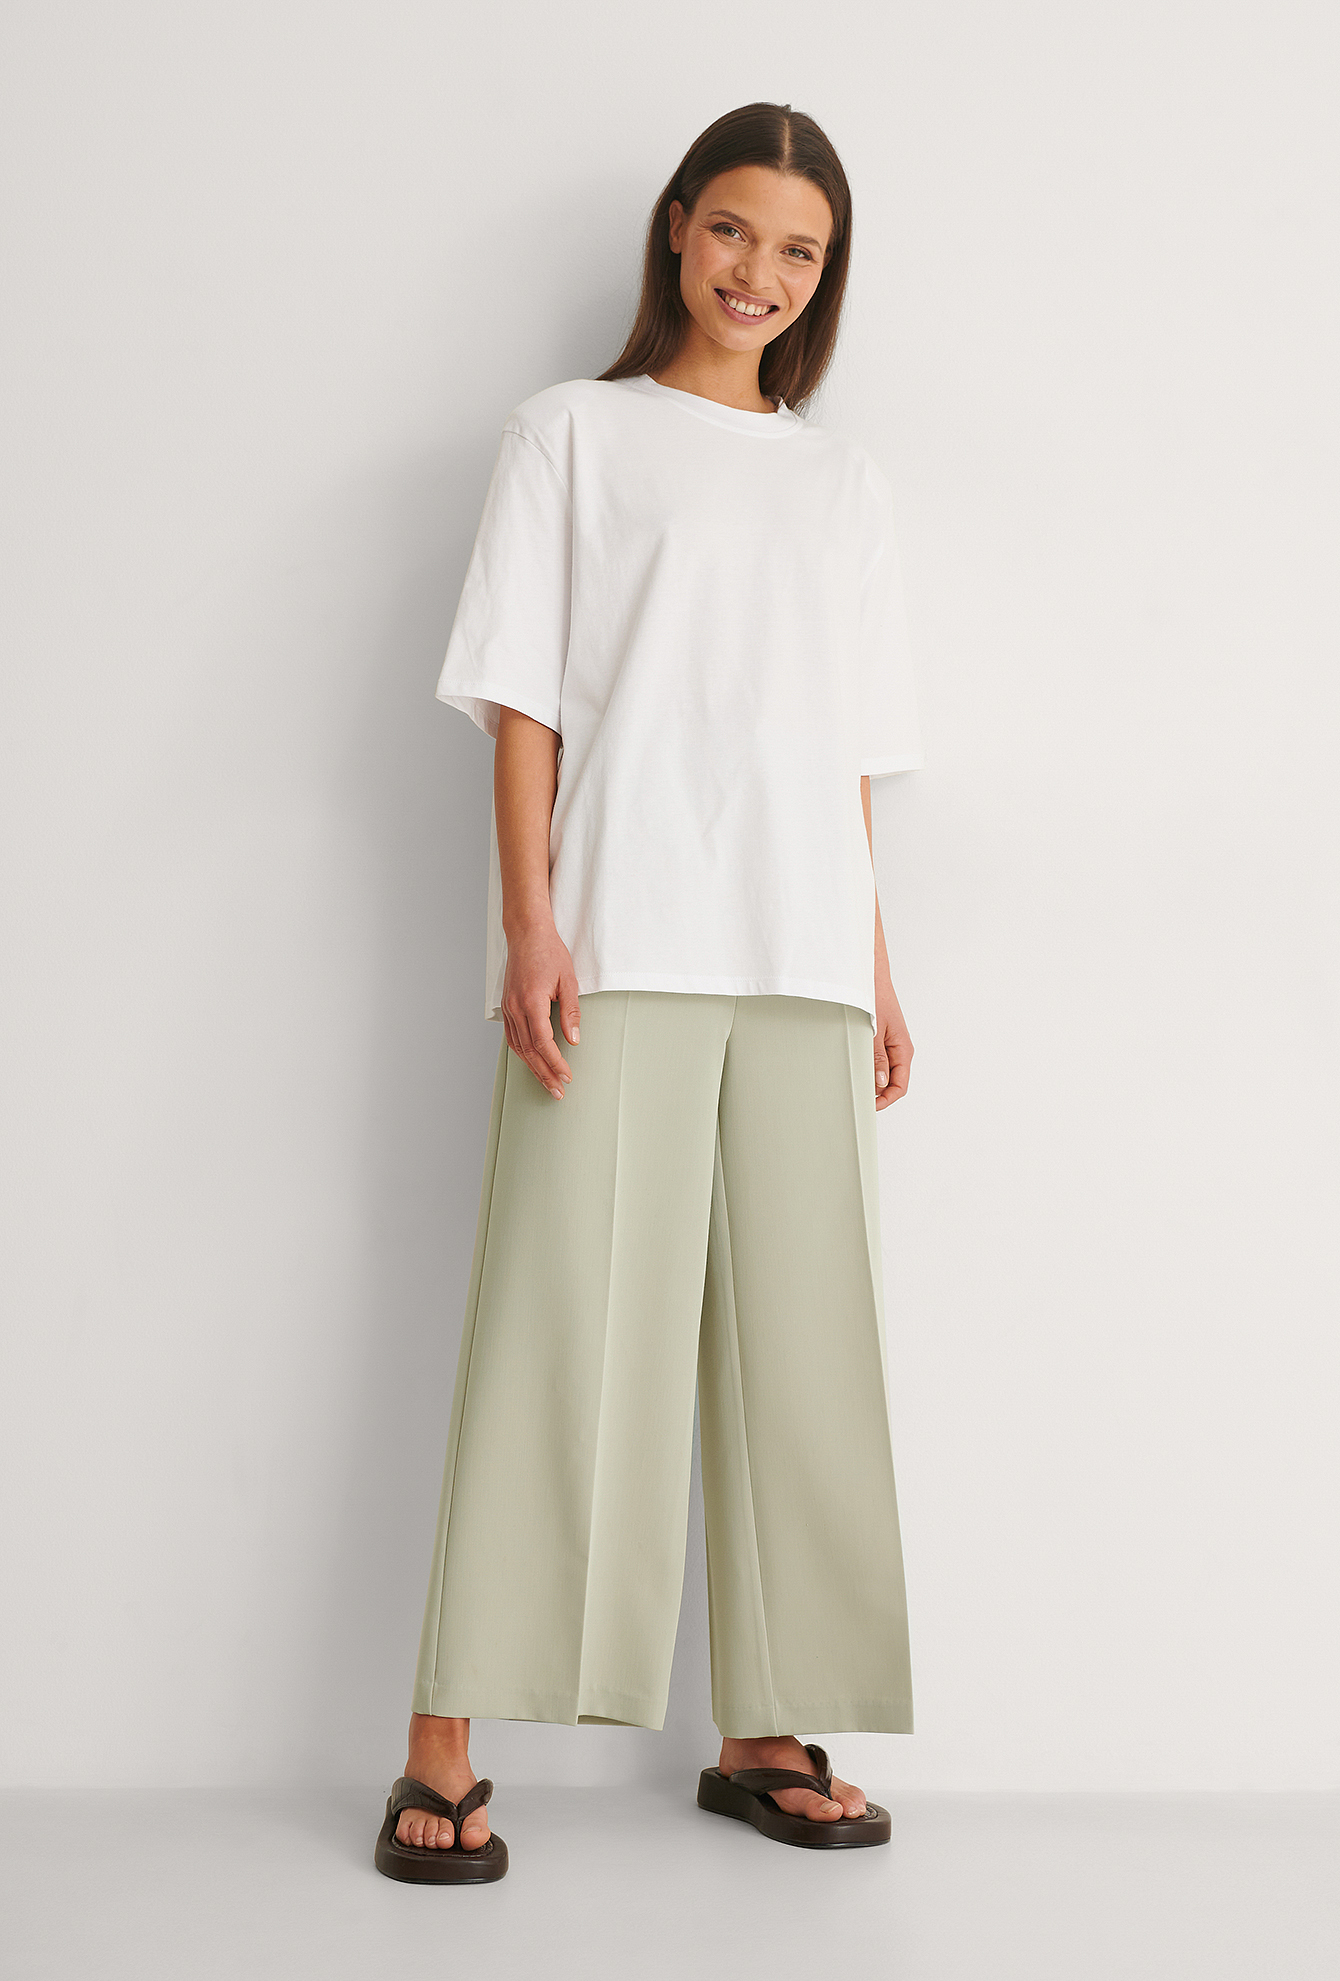 Shoulder Pad Boxy Tee Outfit